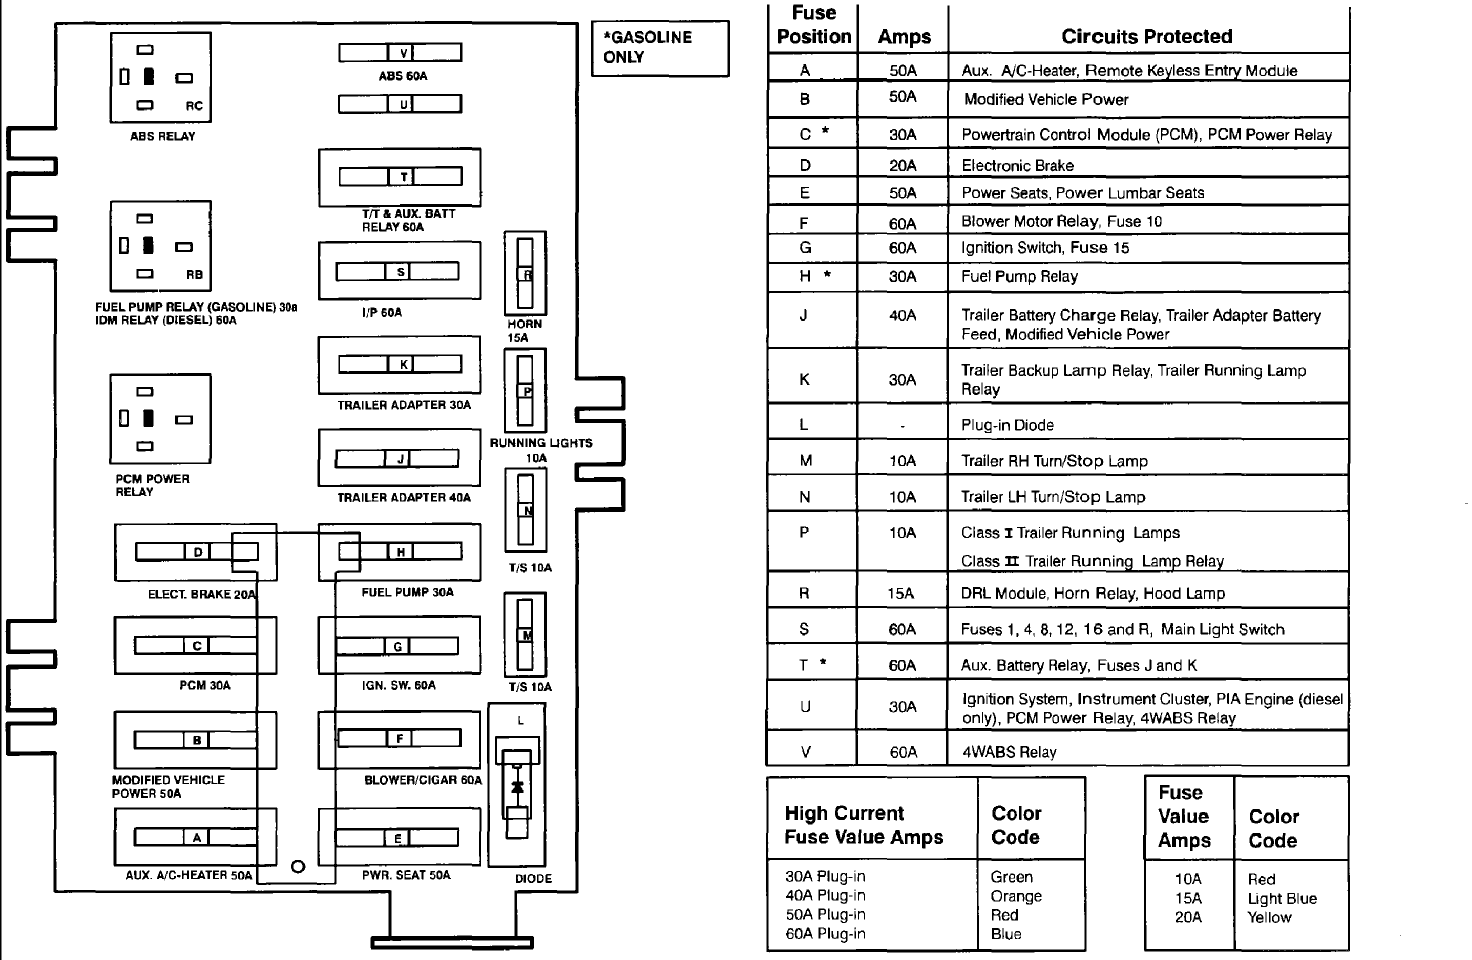 on prodemand 06 ford e450 shuttle bus engine management wiring diagram